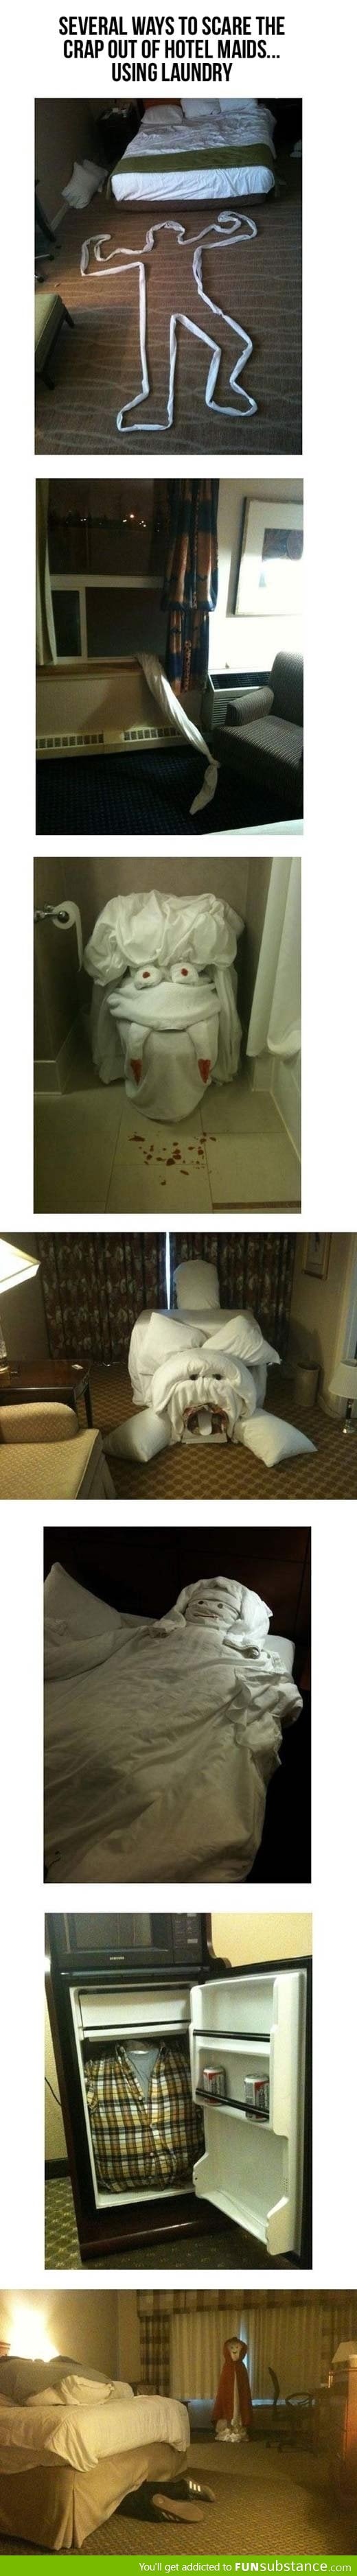 Before leaving your hotel room